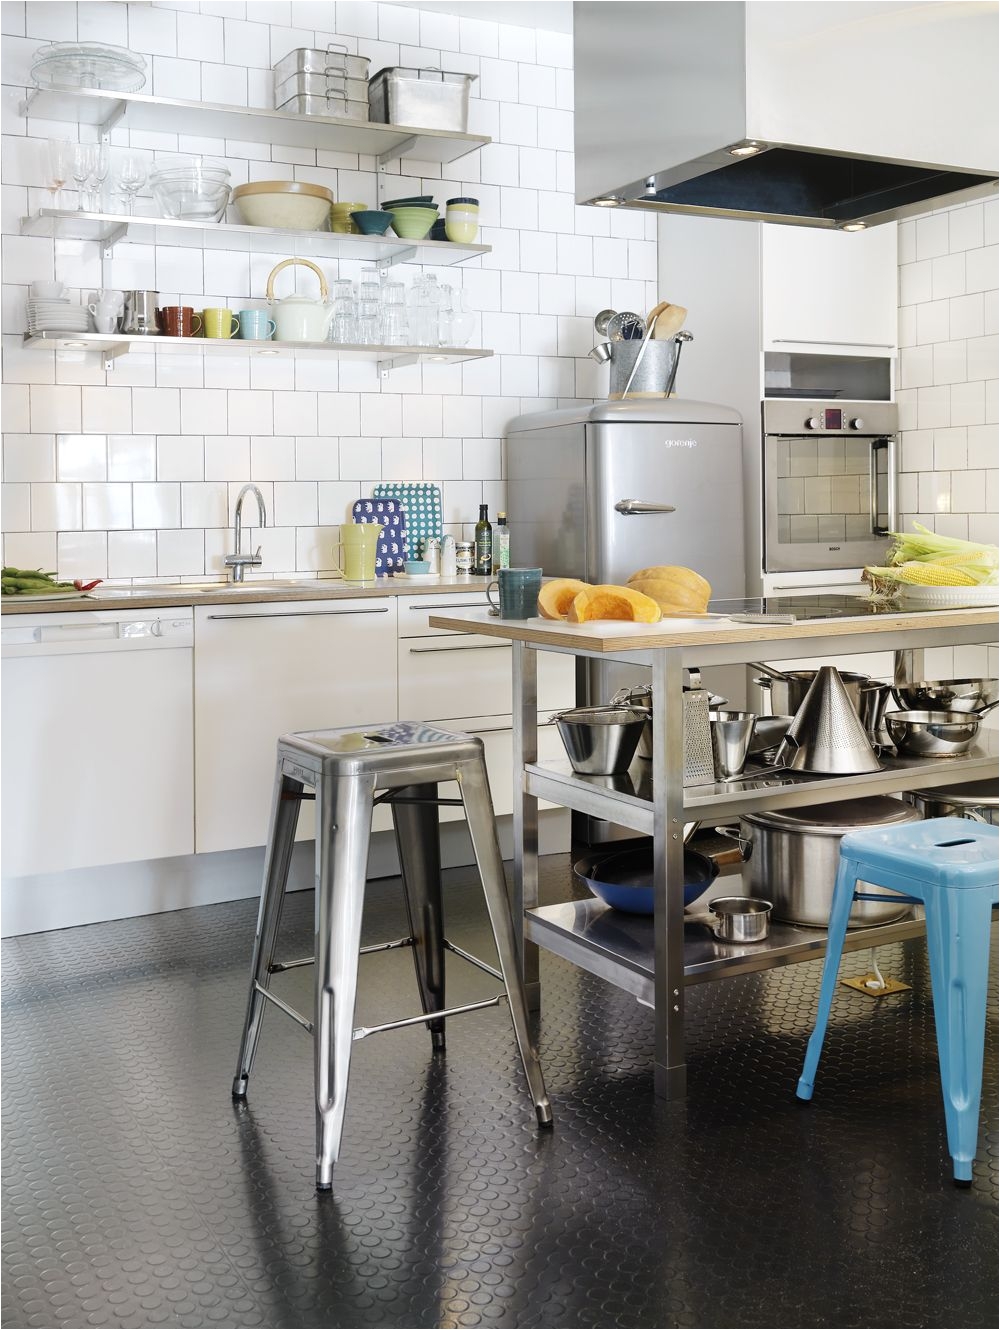 rubber flooring a industrial materials for this kitchen in sweden